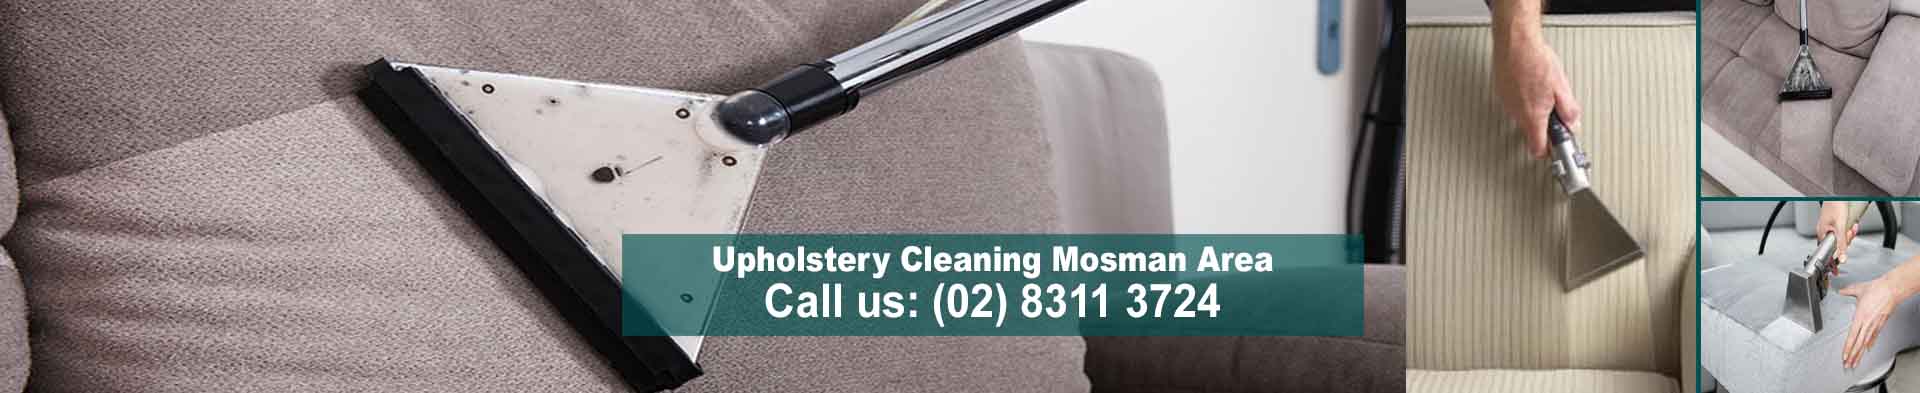 Upholstery Cleaning Mosman Area